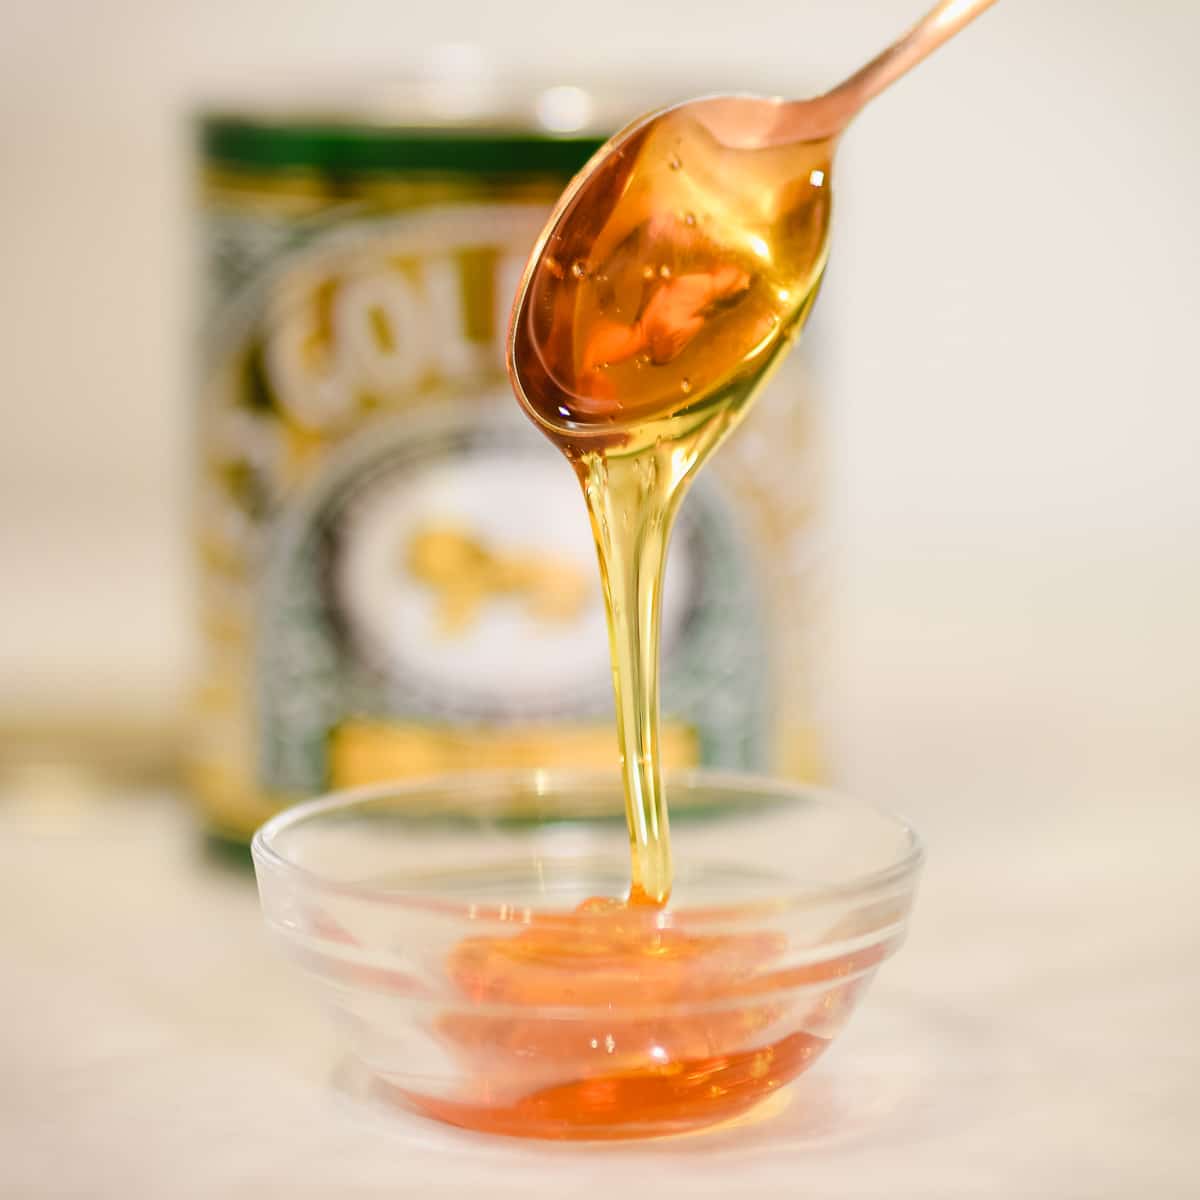 golden syrup dripping off spoon